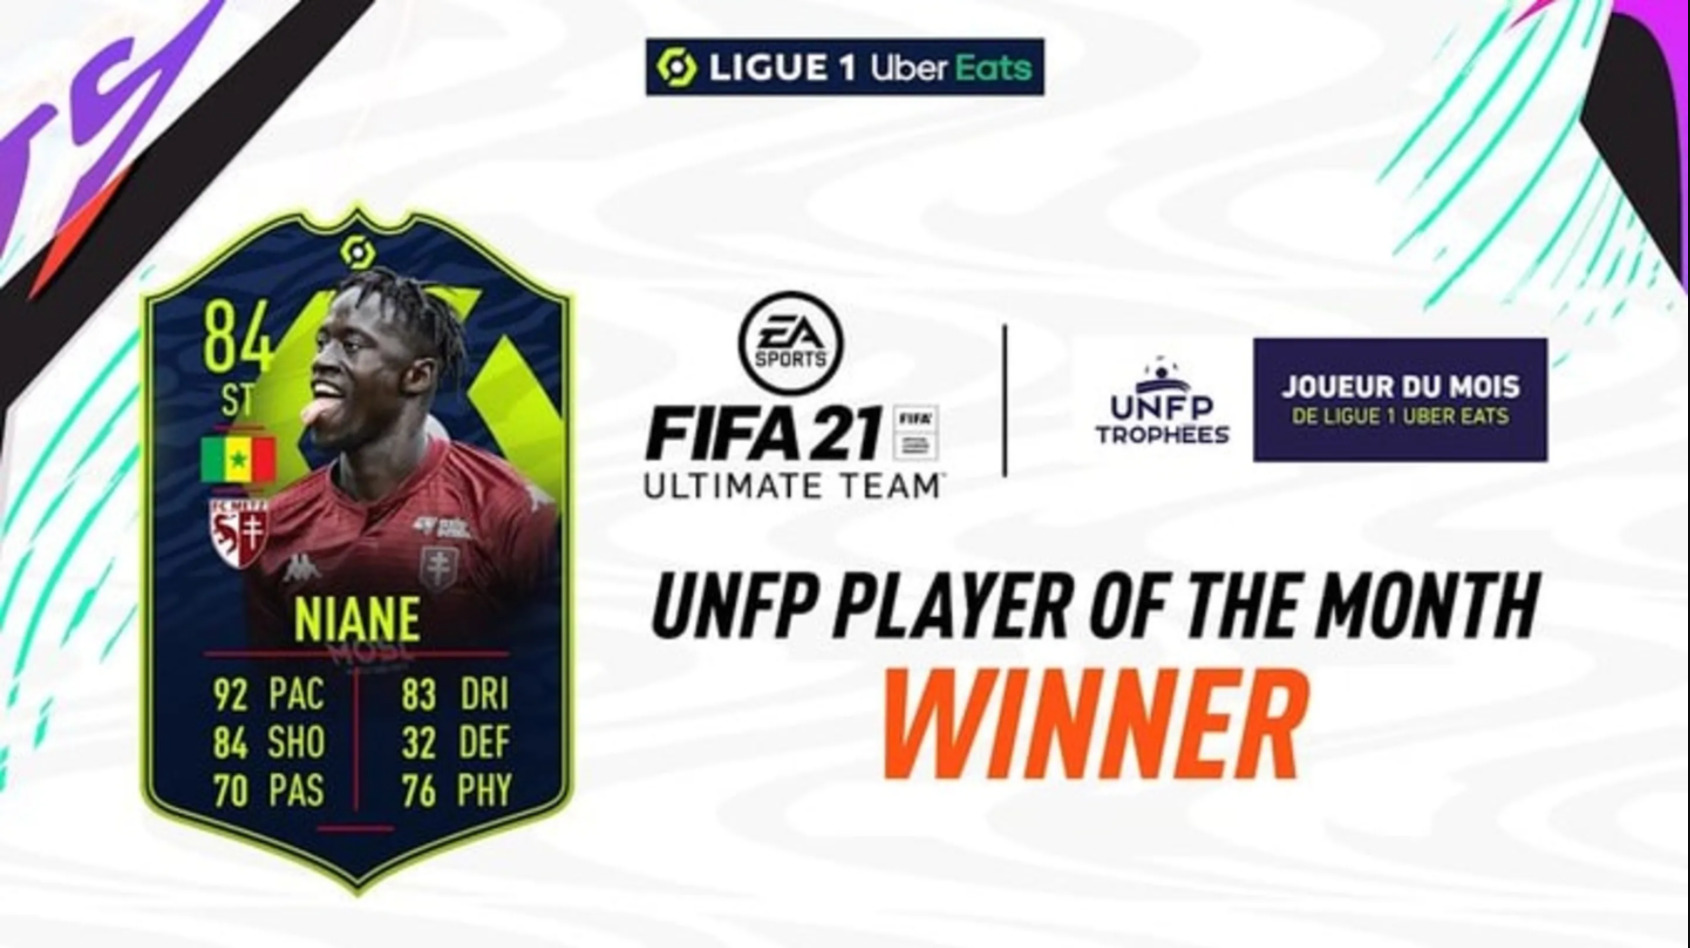 Should You Do The Ibrahima Niane Ligue 1 POTM SBC In FIFA 21? Three Weeks In And This Card Is Already Behind The Curve